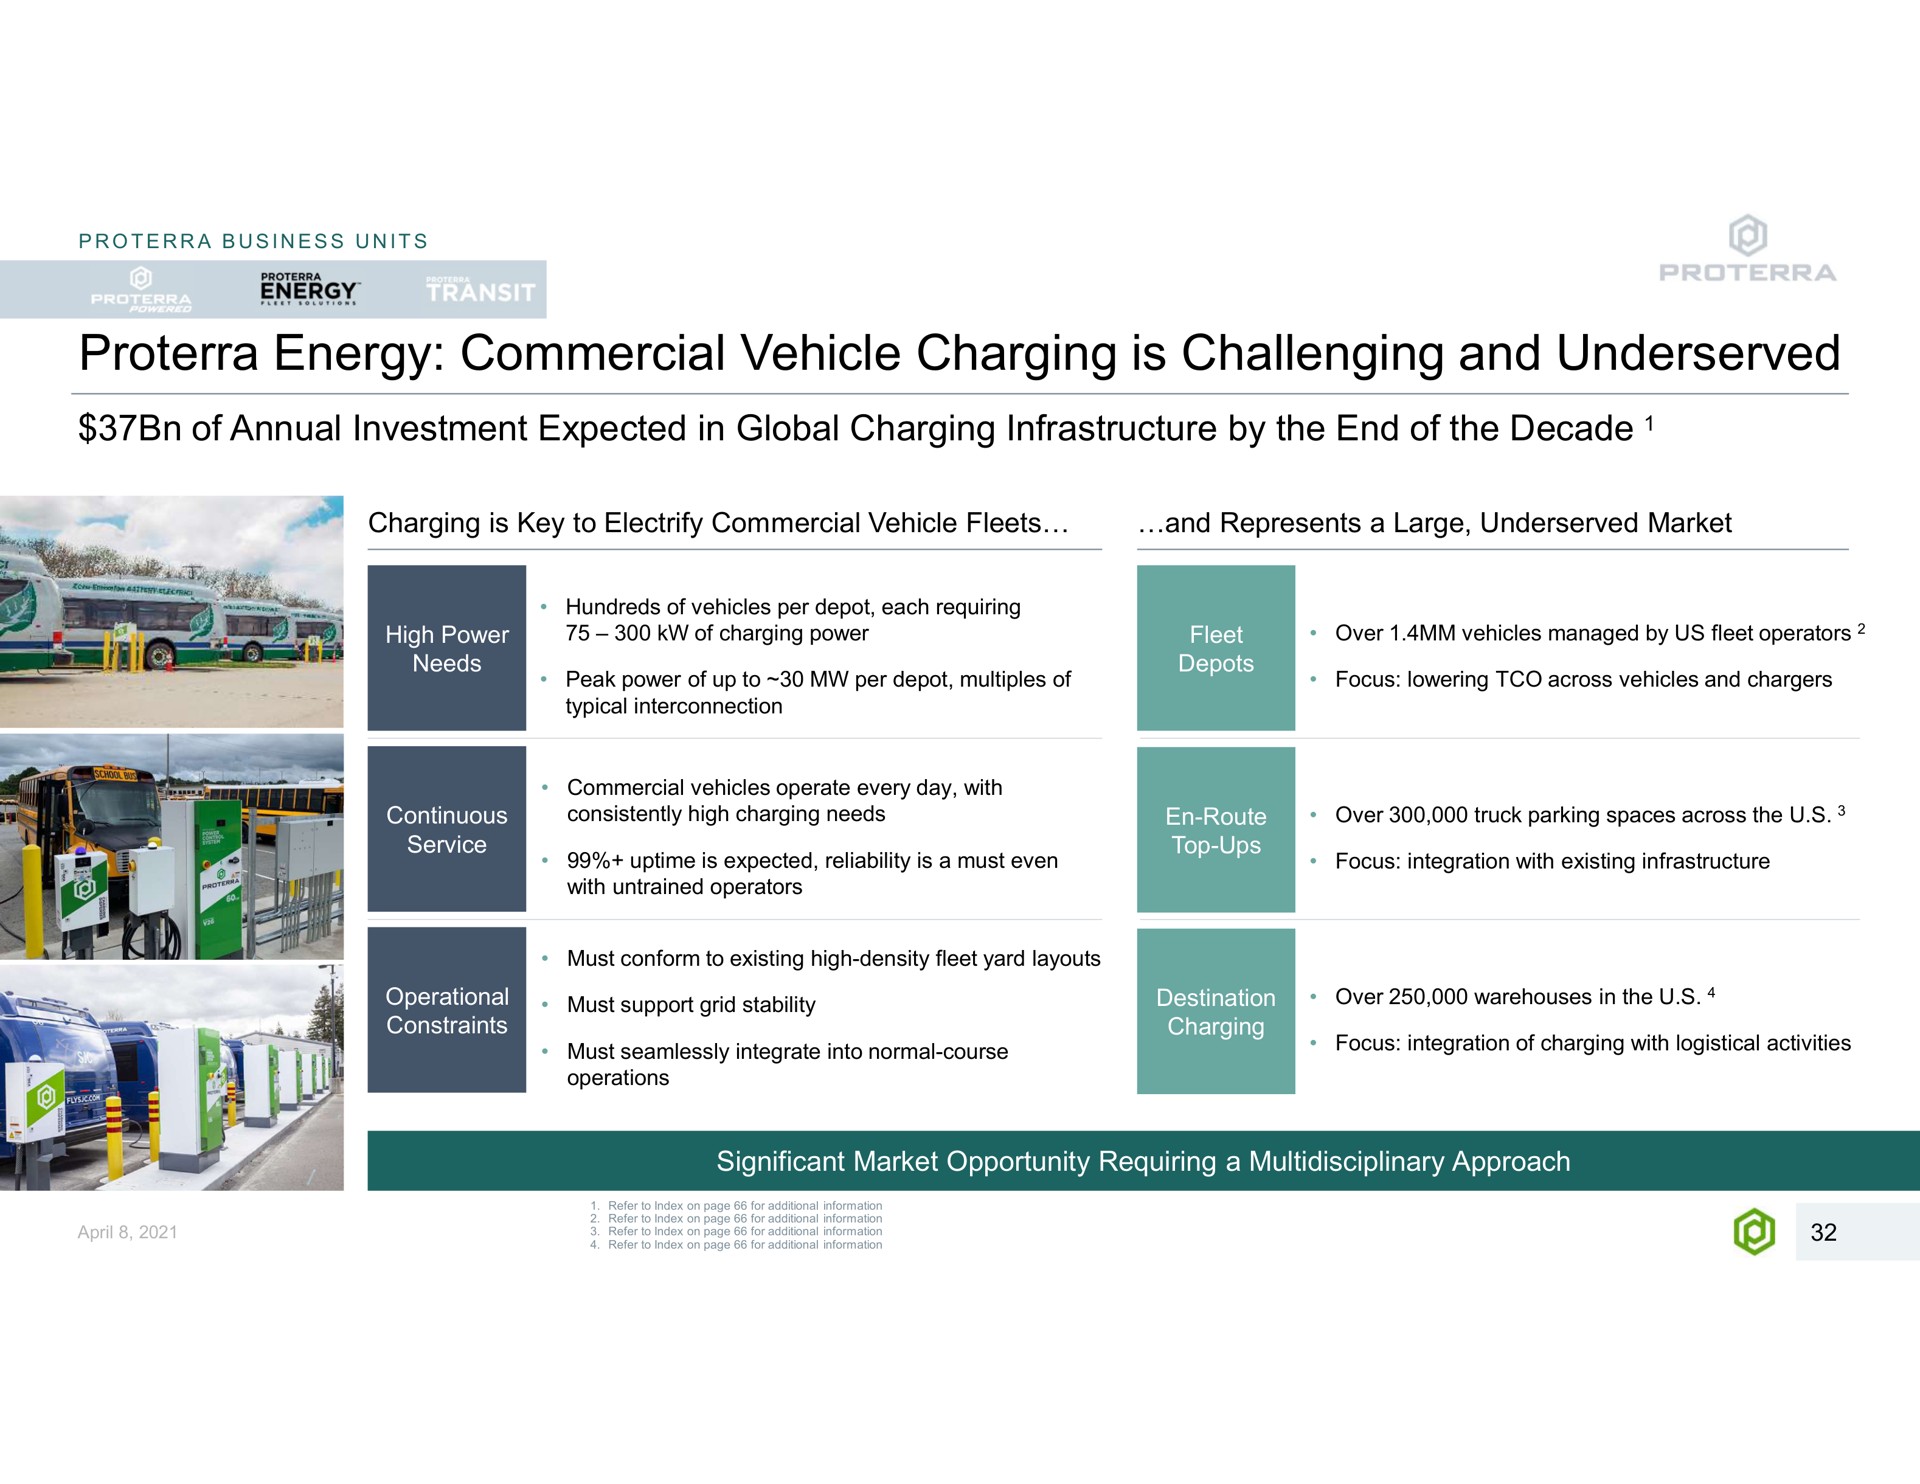 energy commercial vehicle charging is challenging and business units of annual investment expected in global infrastructure by the end of the decade a key to electrify fleets represents a large market needs hundreds of vehicles per depot each requiring of power peak power of up to per depot multiples of typical interconnection continuous service vehicles operate every day with consistently high needs expected reliability a must even with untrained operators must conform to existing high density fleet yard layouts must support grid stability las must seamlessly integrate into normal course by over vehicles managed by us fleet operators focus lowering across vehicles chargers over truck parking spaces across the focus integration with existing infrastructure over warehouses in the focus integration of with logistical activities sas operations significant market opportunity requiring a approach refer to index on page for additional information refer to index on page for additional information refer to index on page for additional information refer to index on page for additional information | Proterra